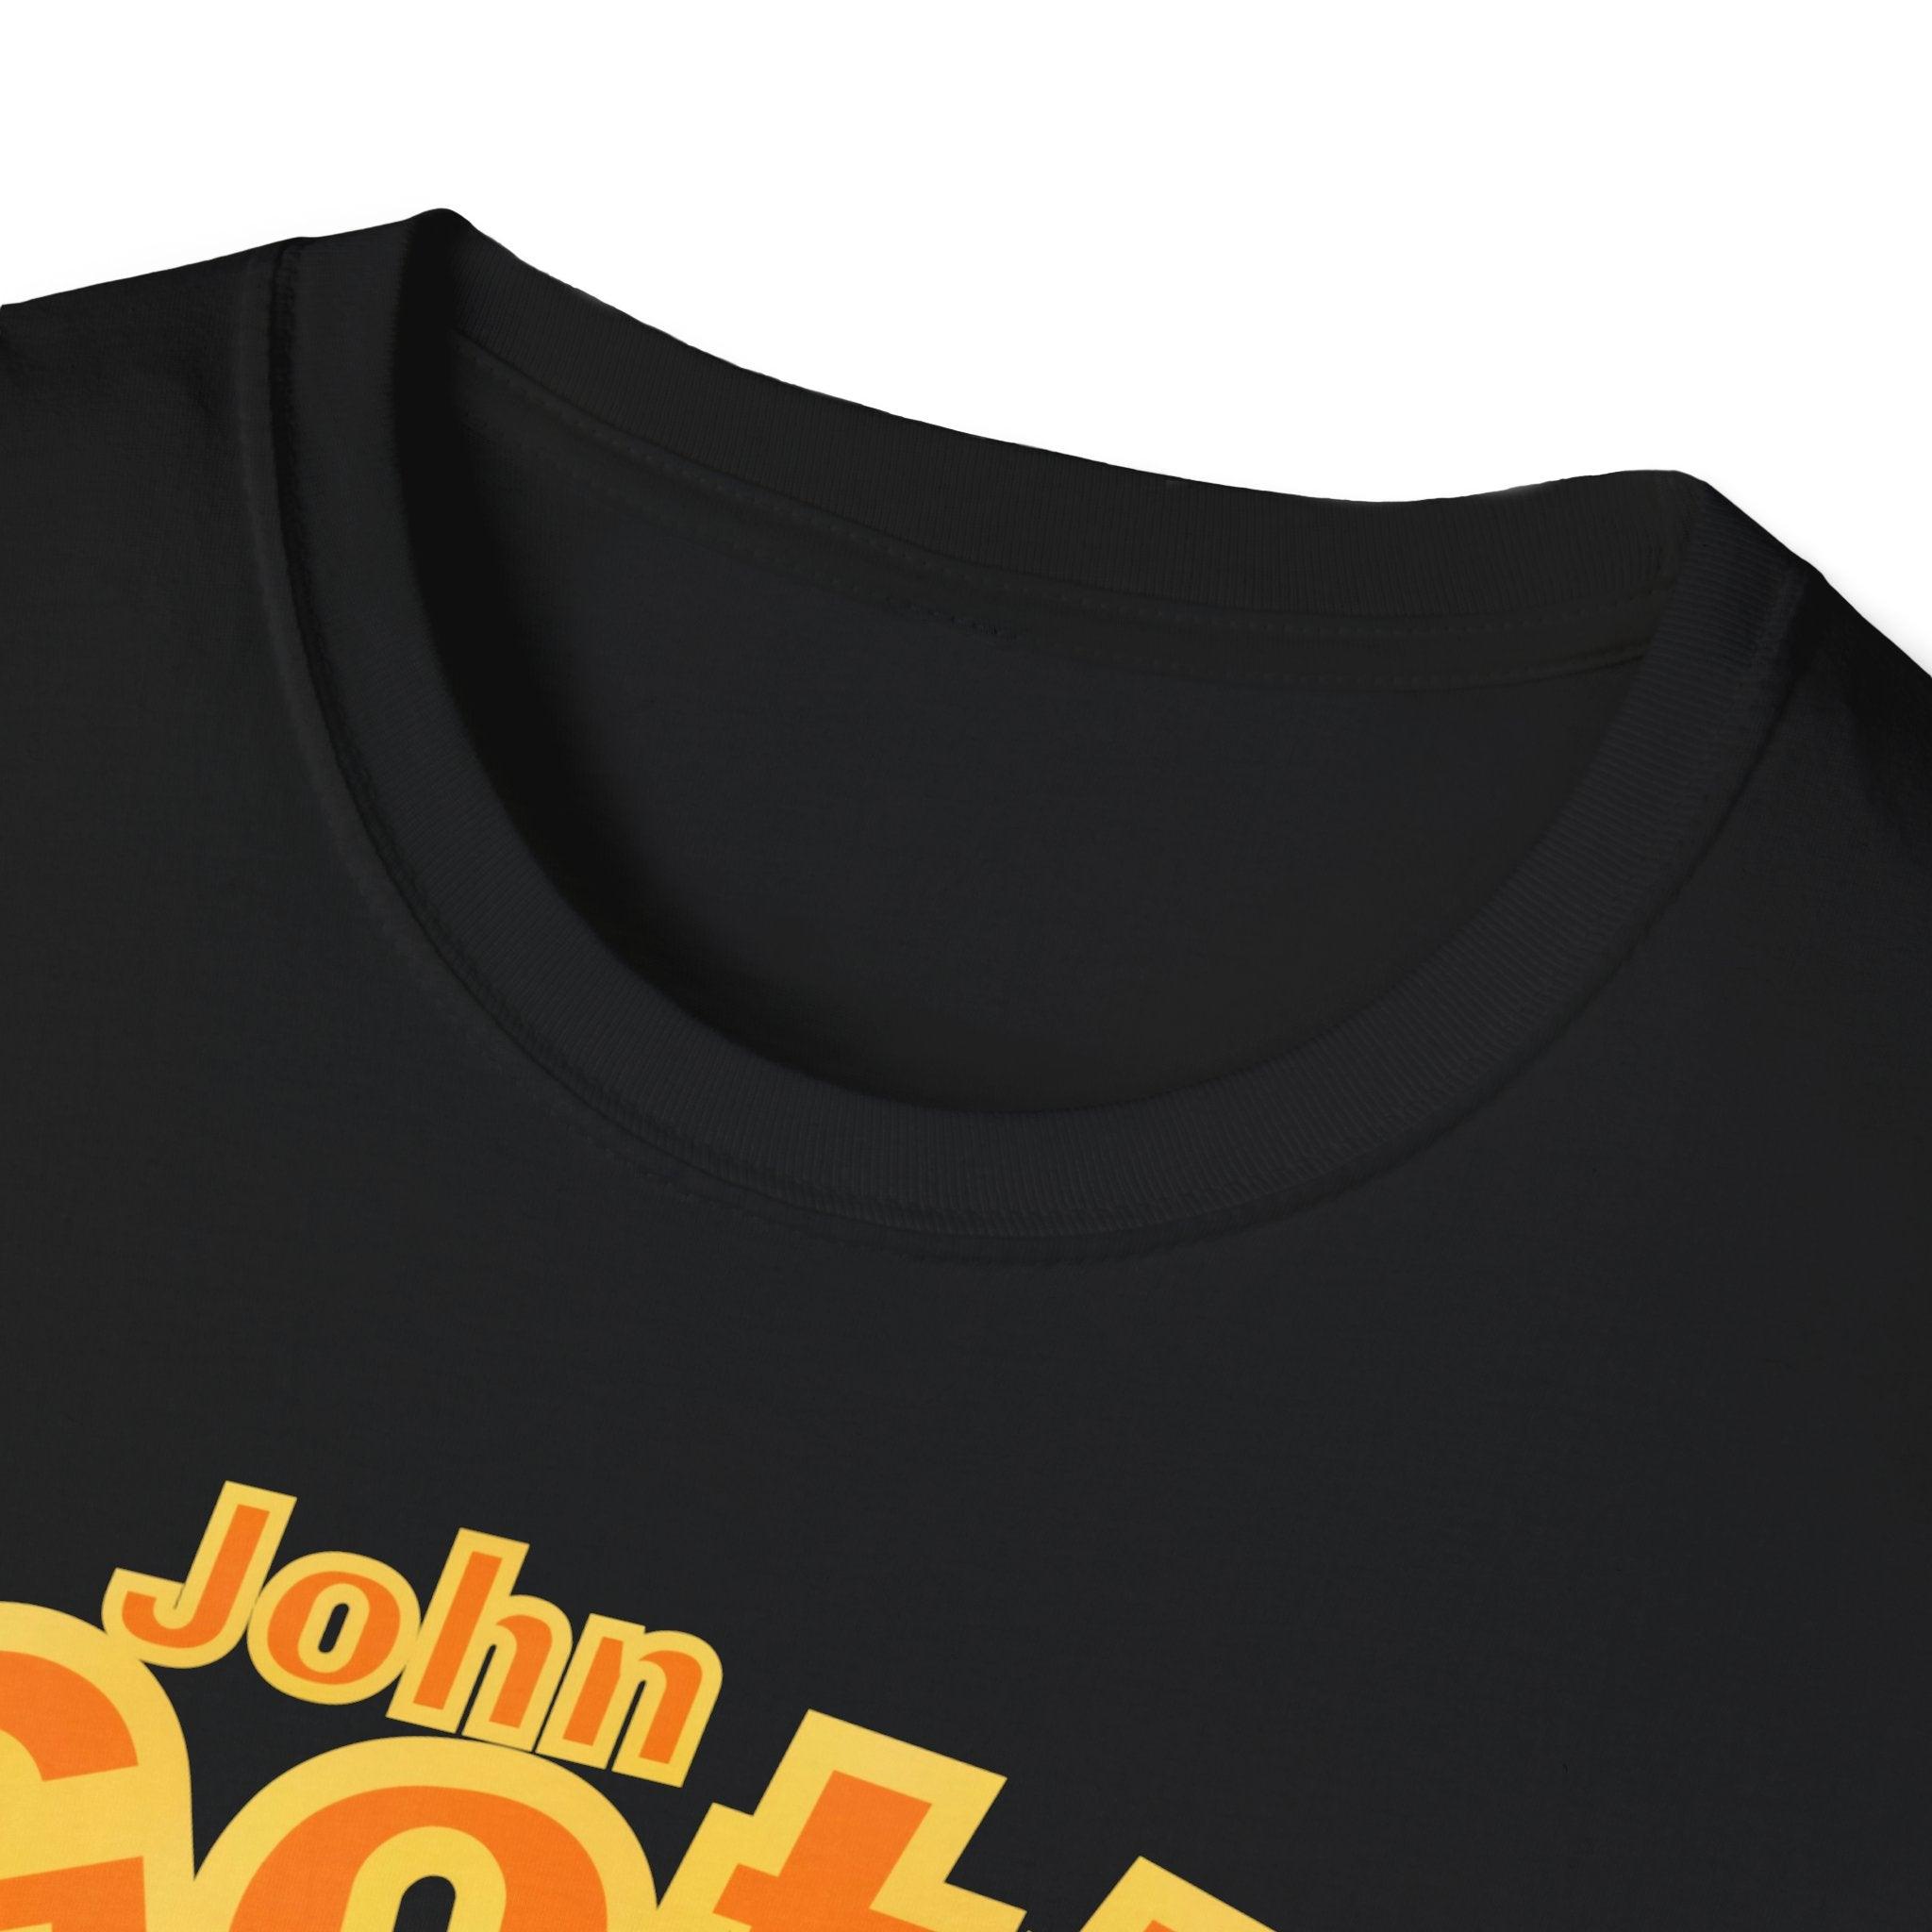 John Gotti - “Follow orders or I’ll blow up your house” T-shirt - Epic Shirts 403